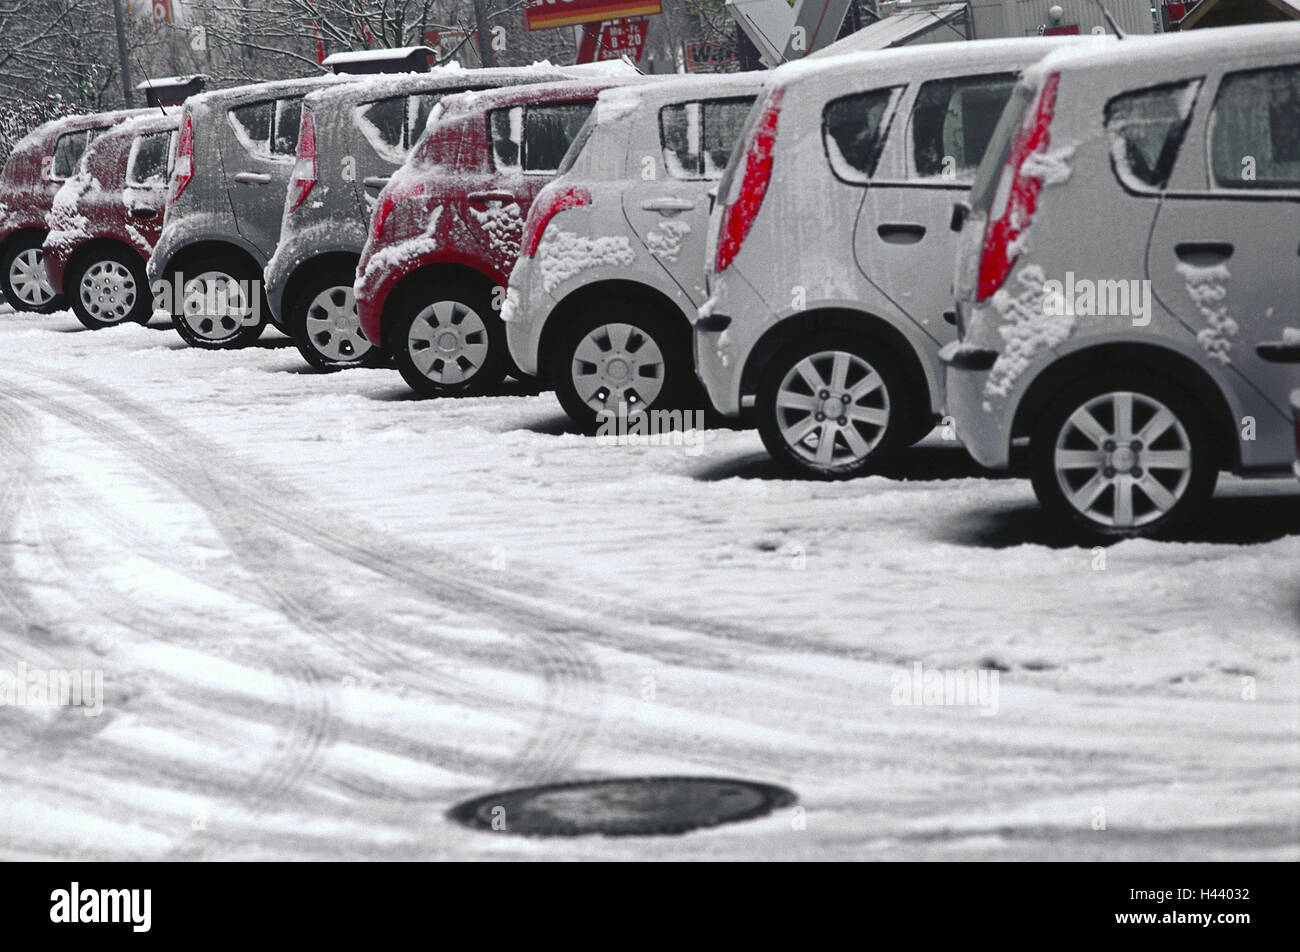 Parking lot, Pkw's, snow-covered, series, detail, car dealer, vehicle market, cars, economy, car dealer, vehicles, new vehicles, lined up, deserted, winter, outside, snow, conception, economic crisis, Stock Photo